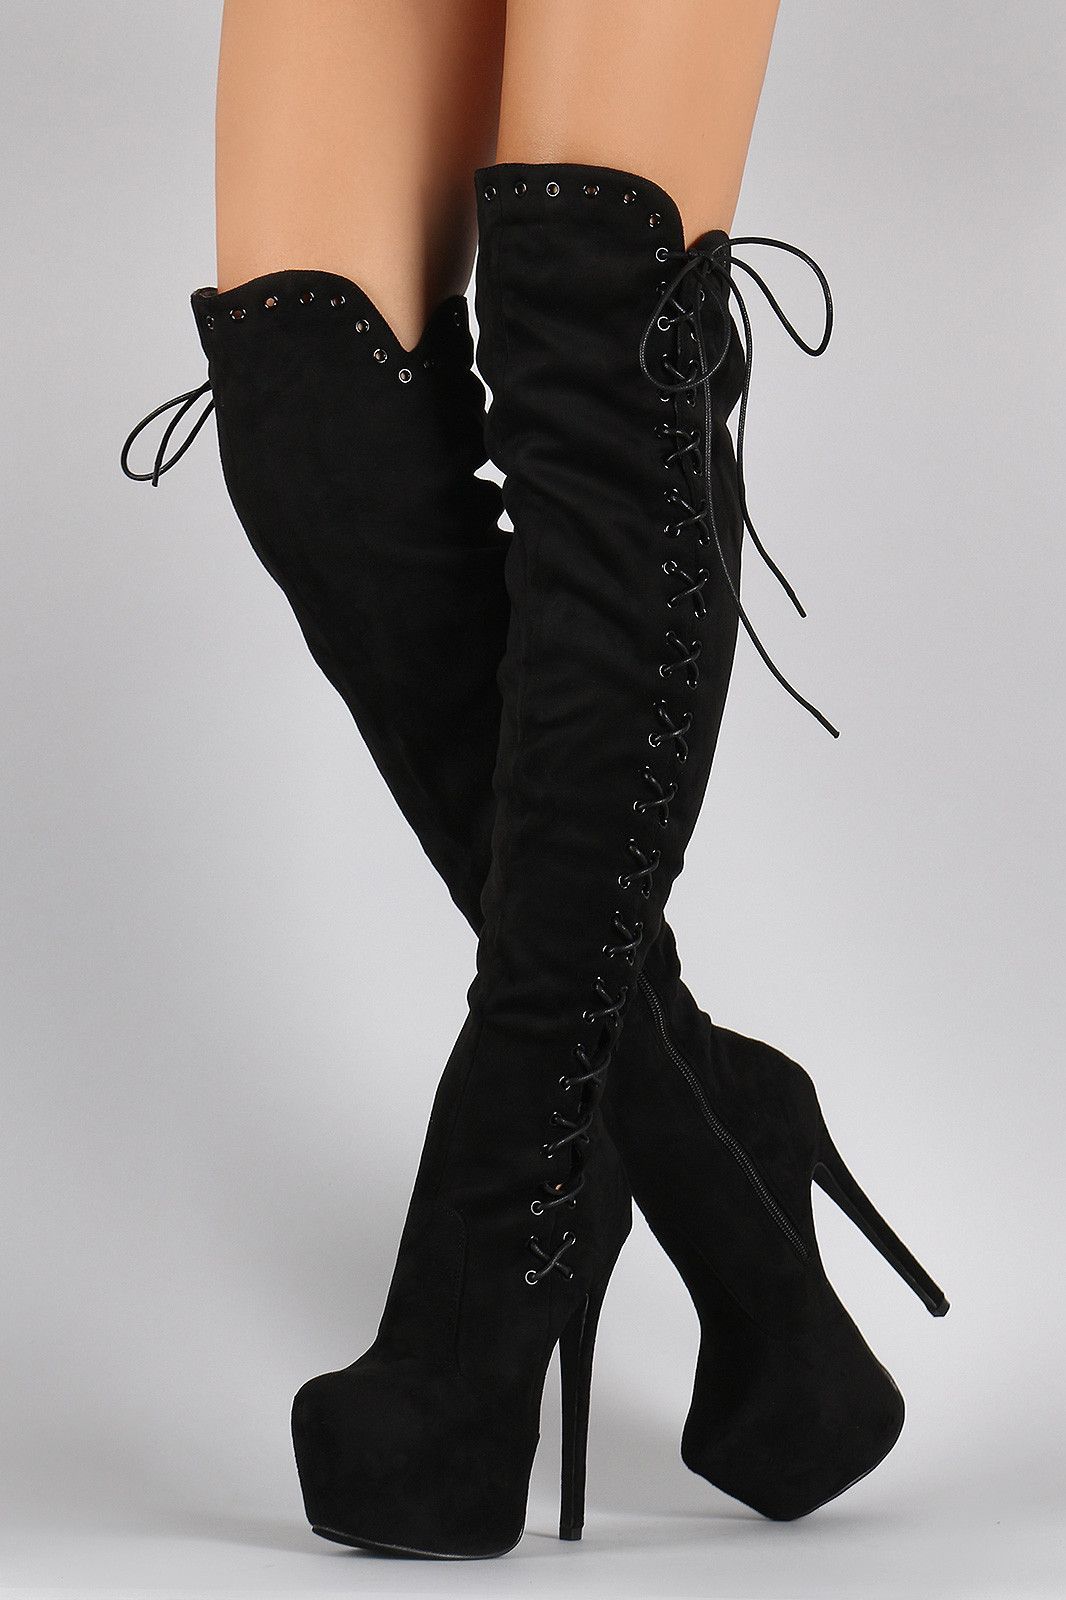 Stiletto Boots Compliment Your
Personality